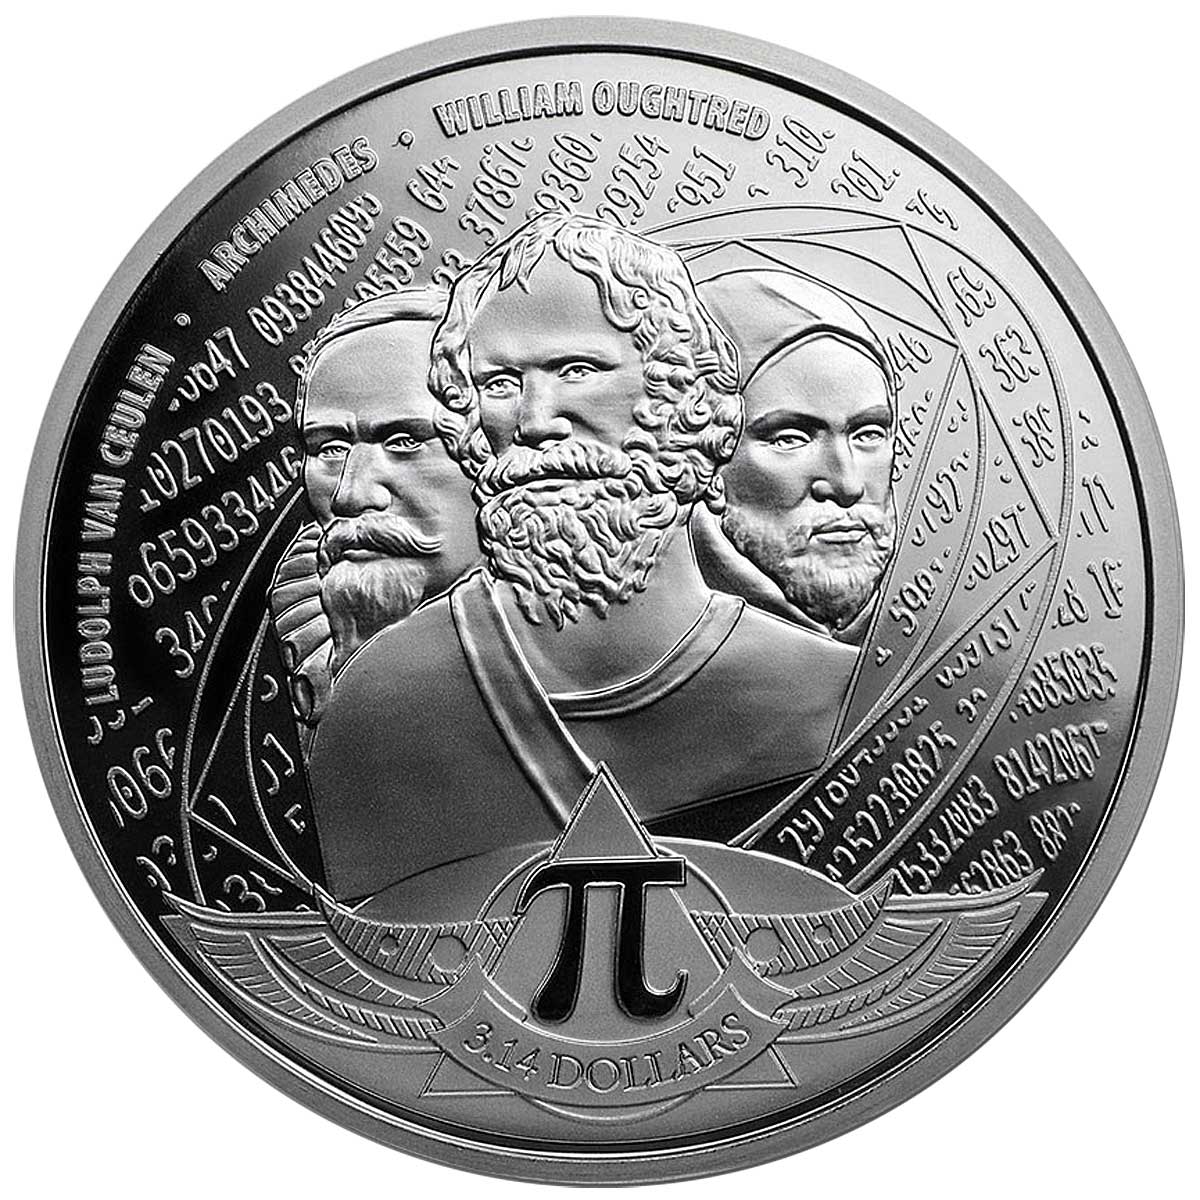 March 14th is PiDay and APMEX have a limited run silver ...